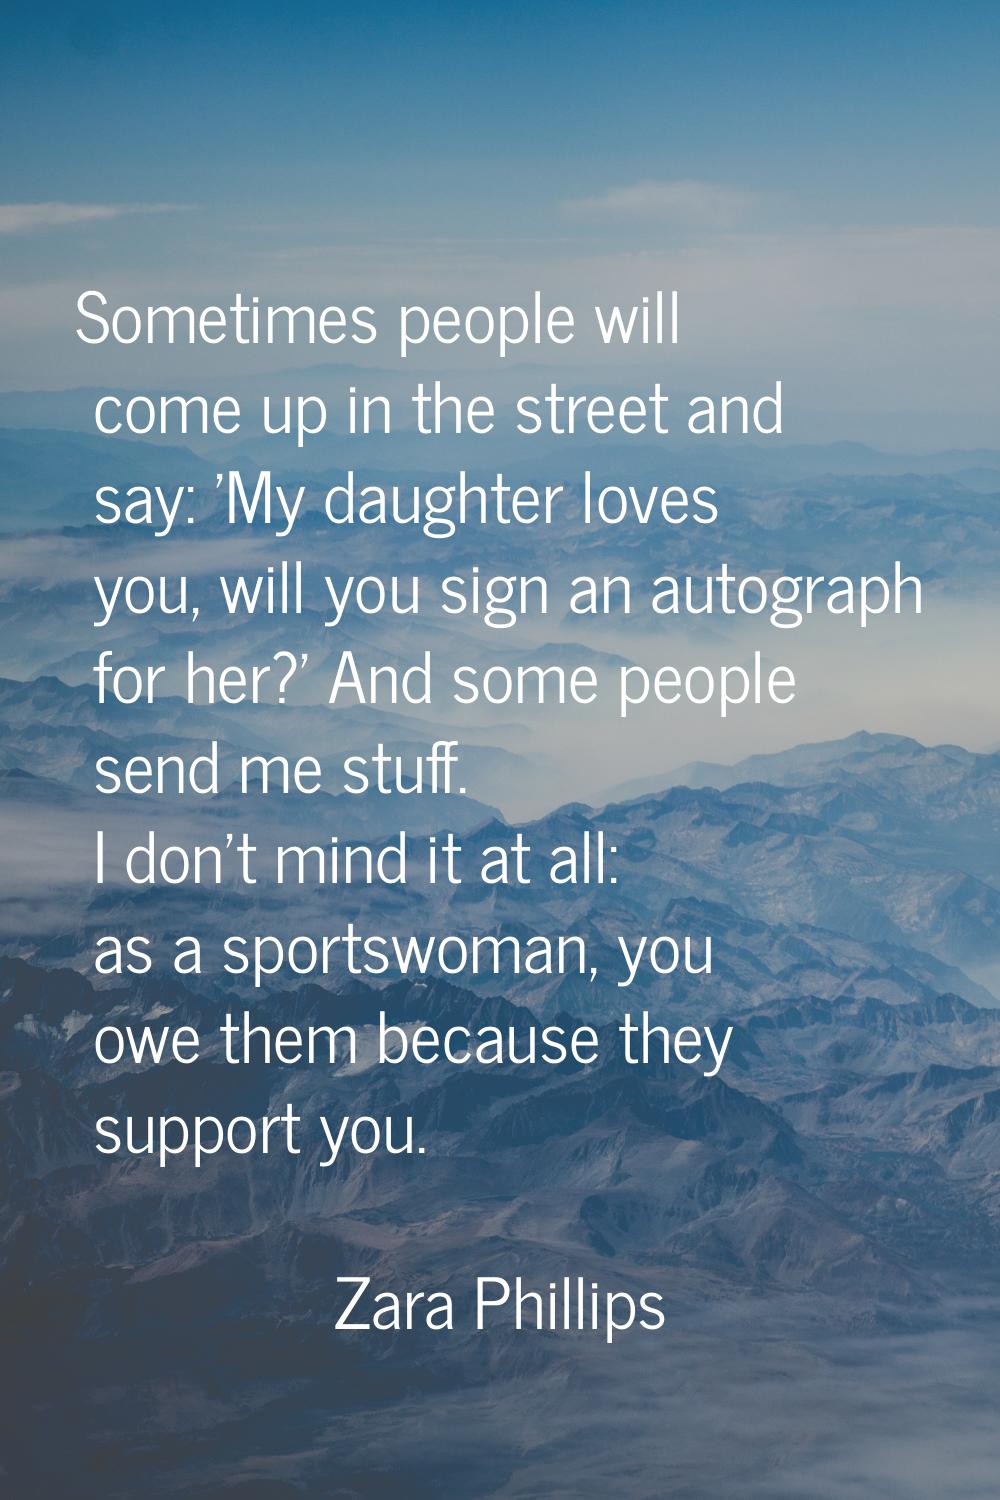 Sometimes people will come up in the street and say: 'My daughter loves you, will you sign an autog